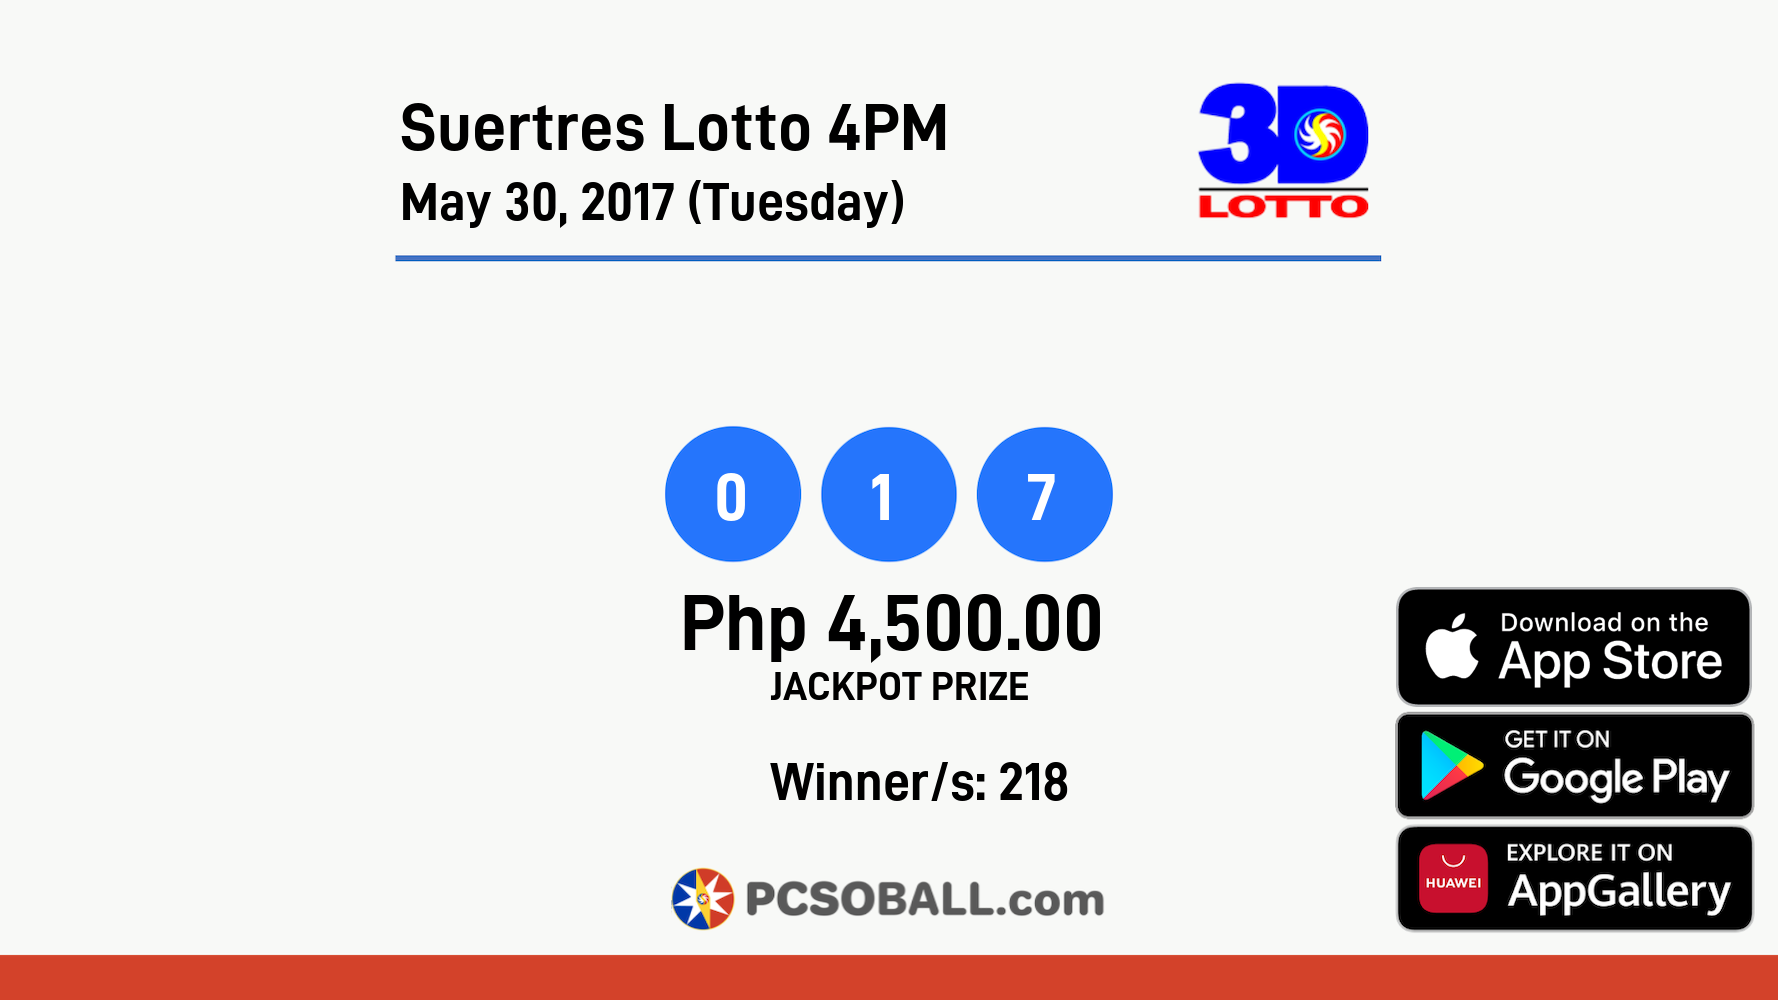 Suertres Lotto 4PM May 30, 2017 (Tuesday) Result